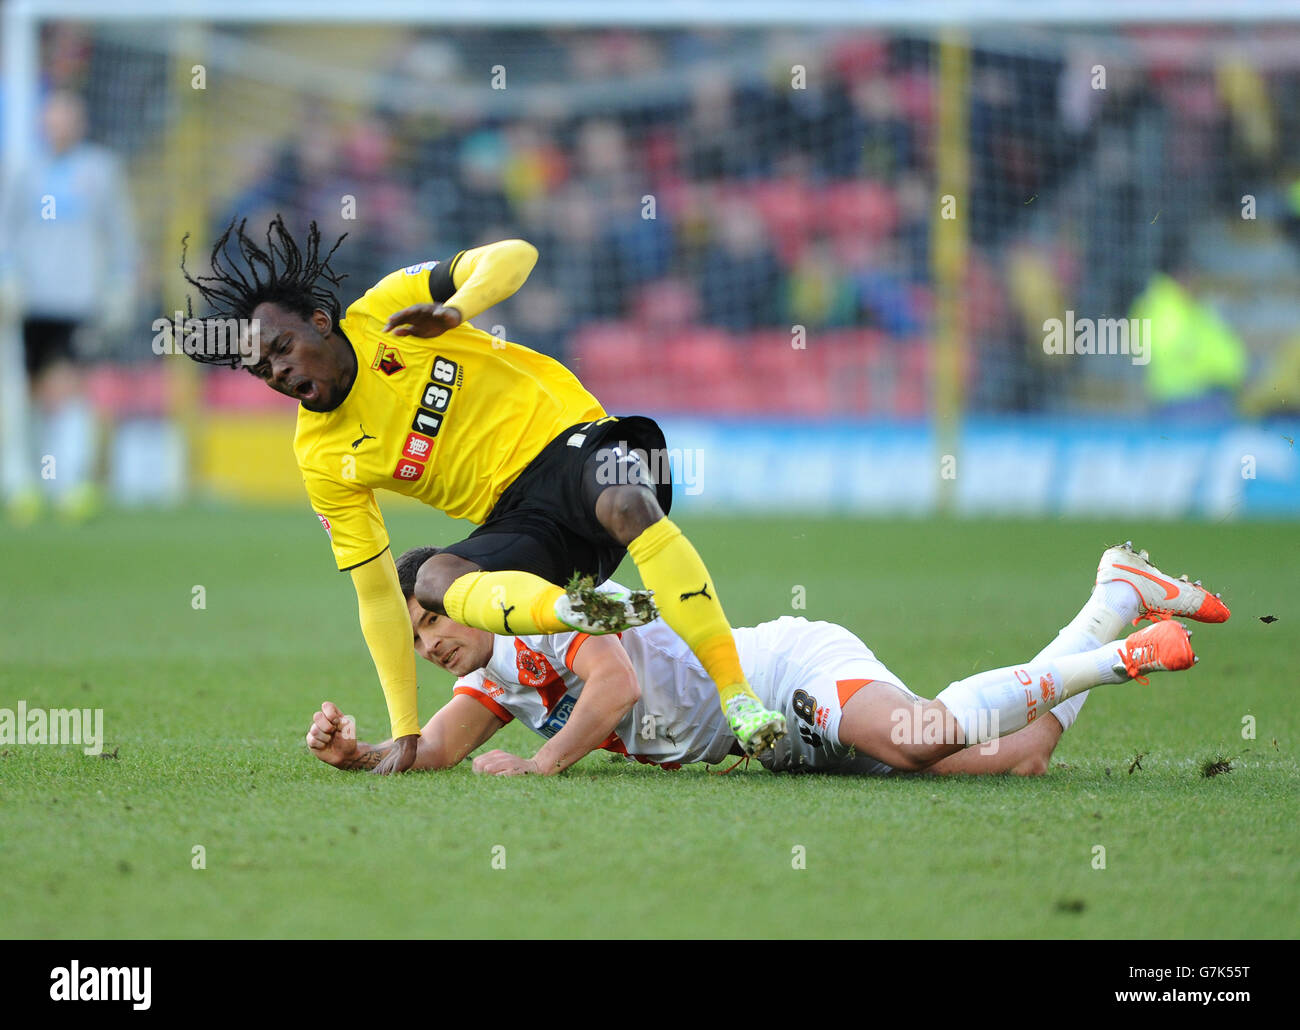 Watford's Juan Carlos Paredes (left) is tackled by Blackpool's Darren O'Dea Stock Photo